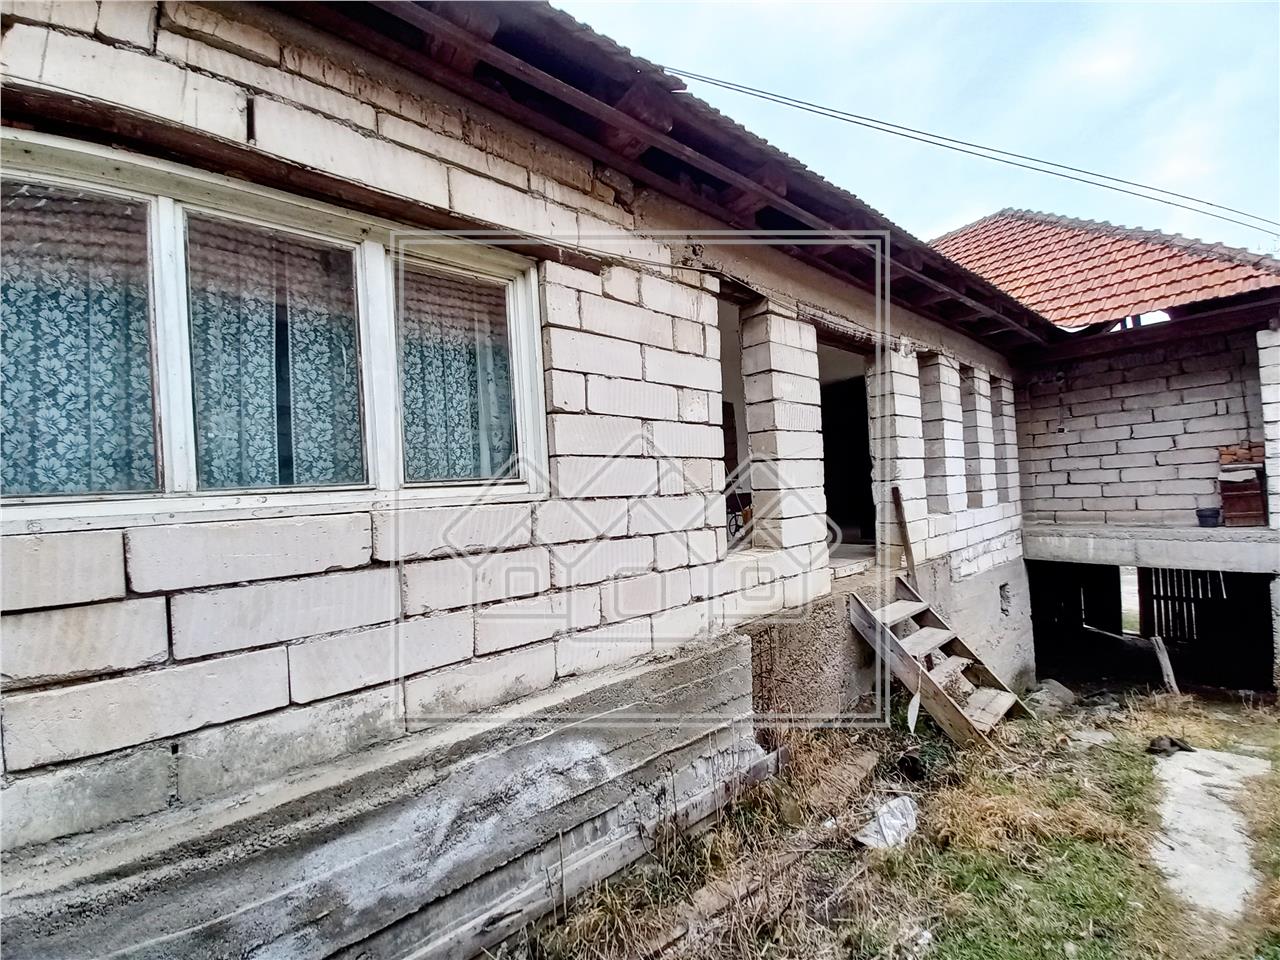 House for sale in Cugur - 5 rooms - 130 usable sqm